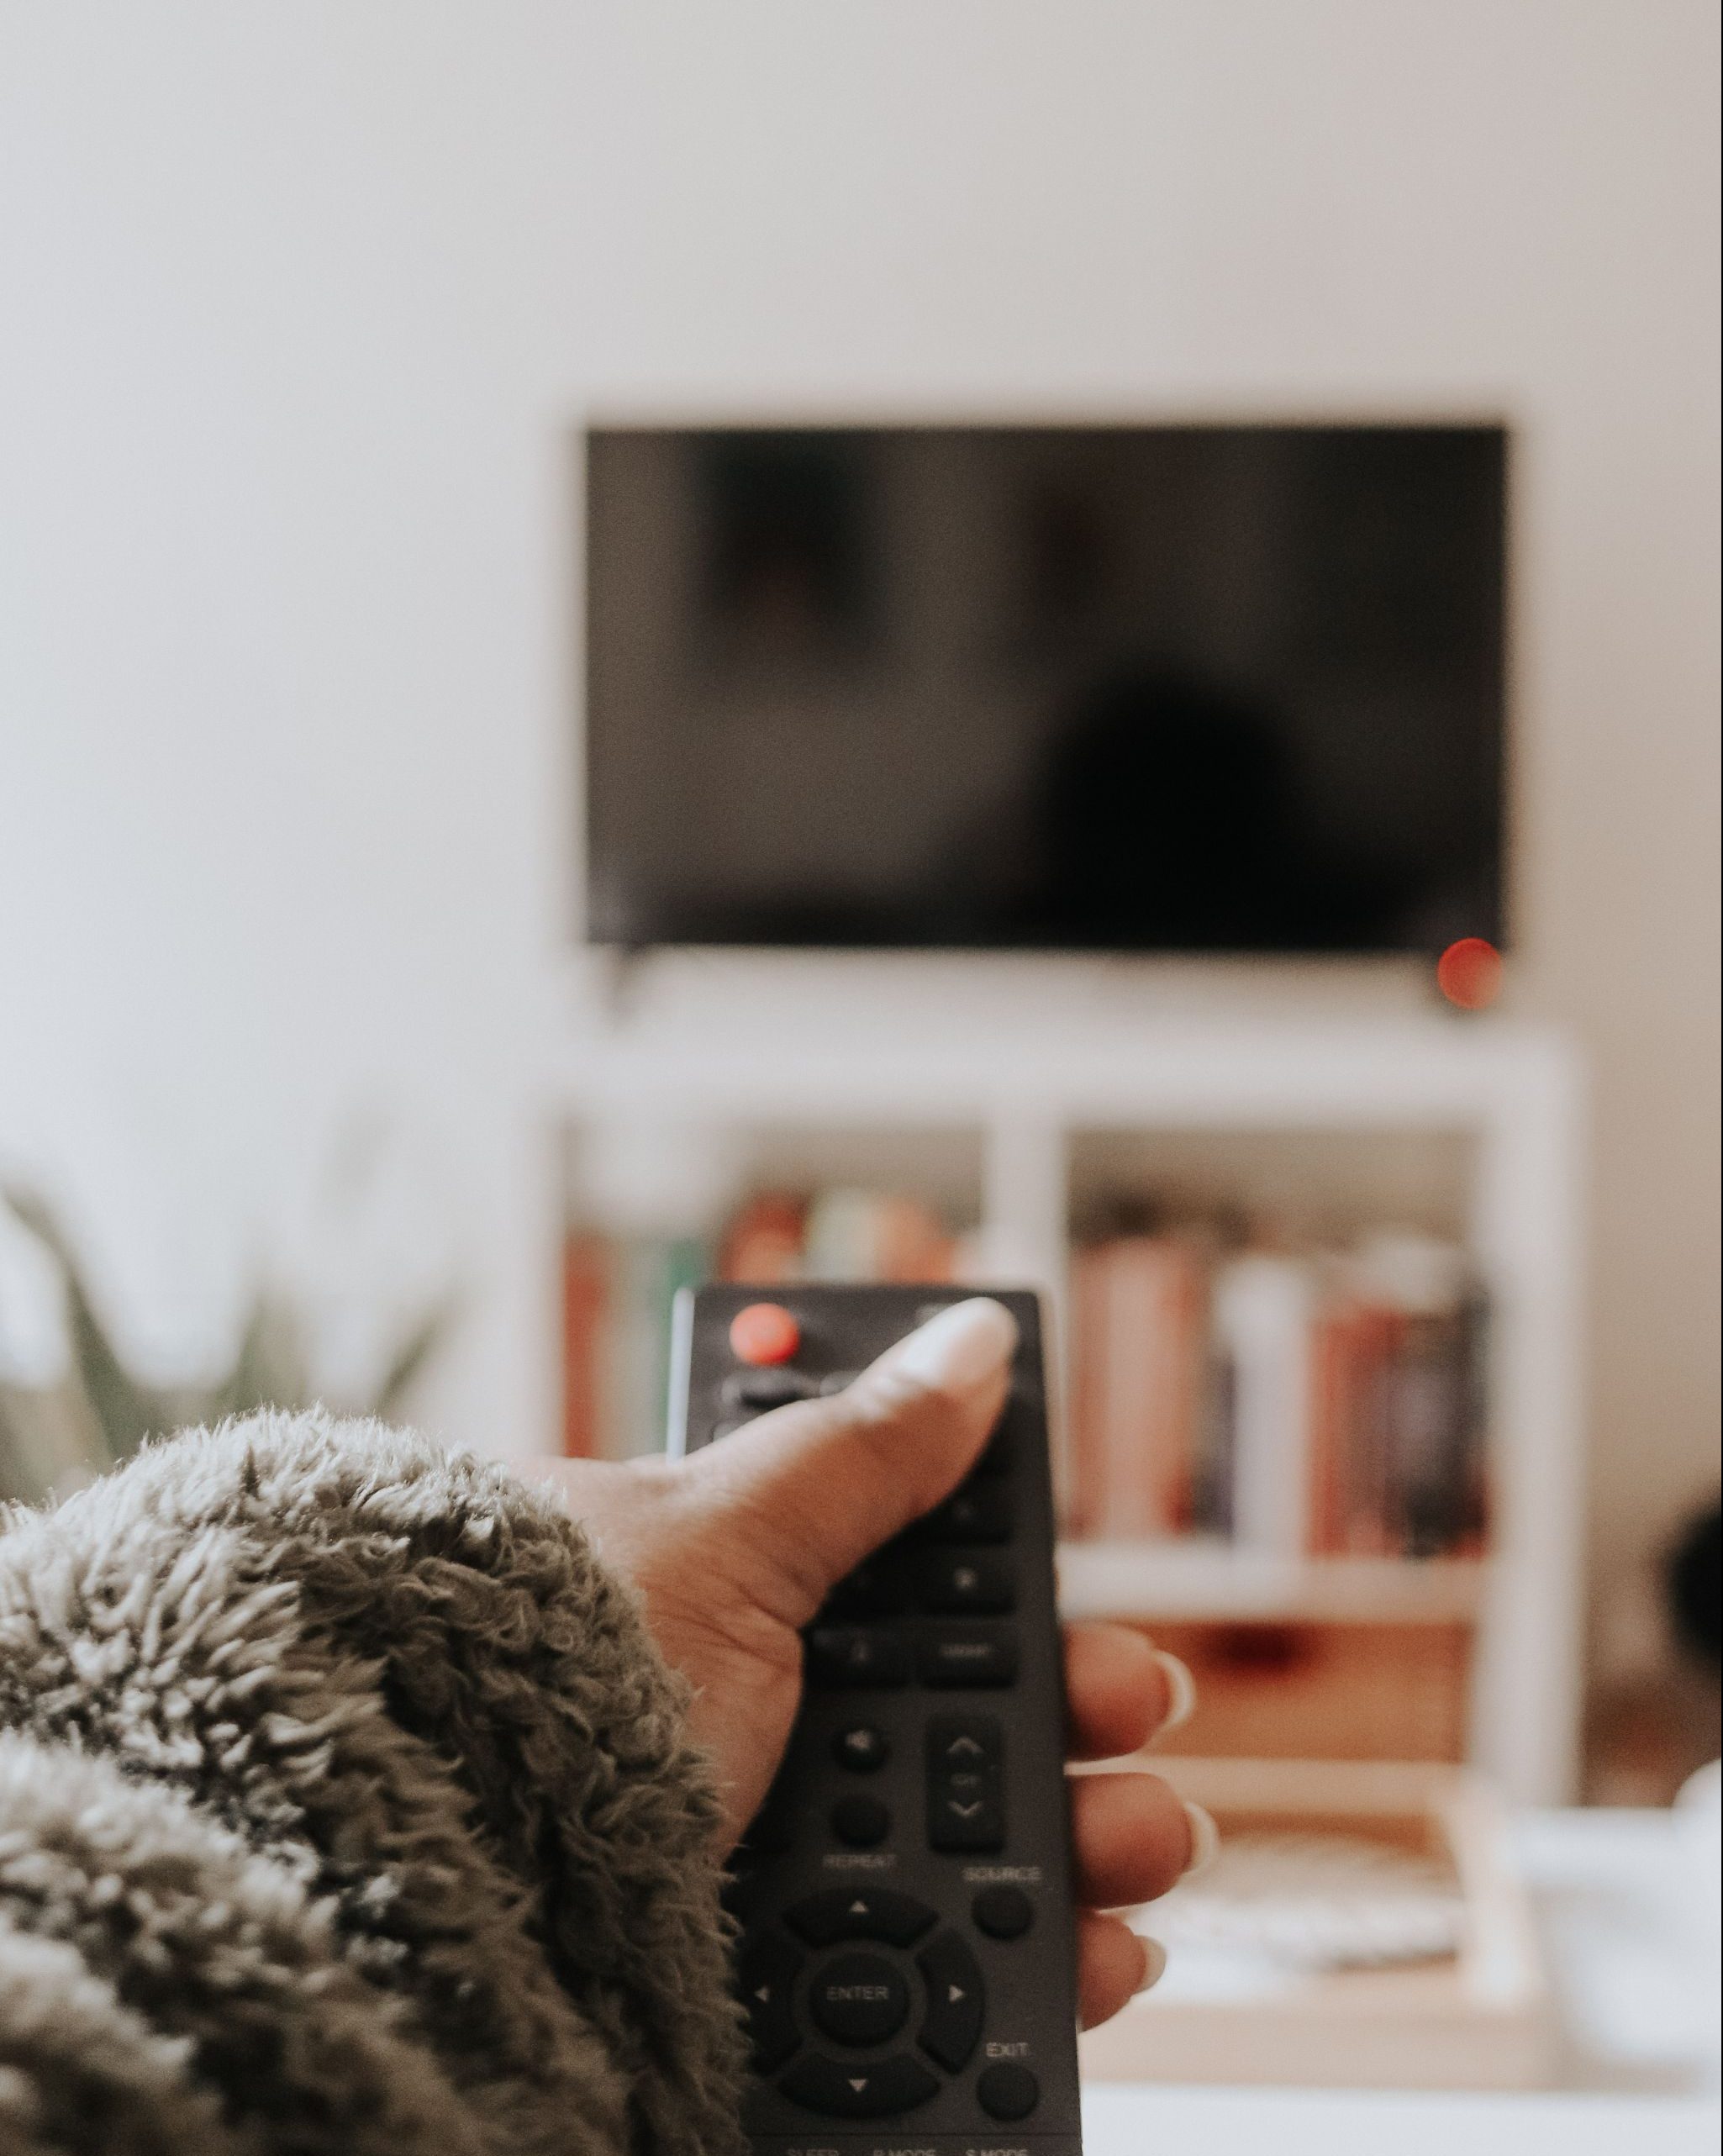 TV Recommendations: What I’m Binge Watching